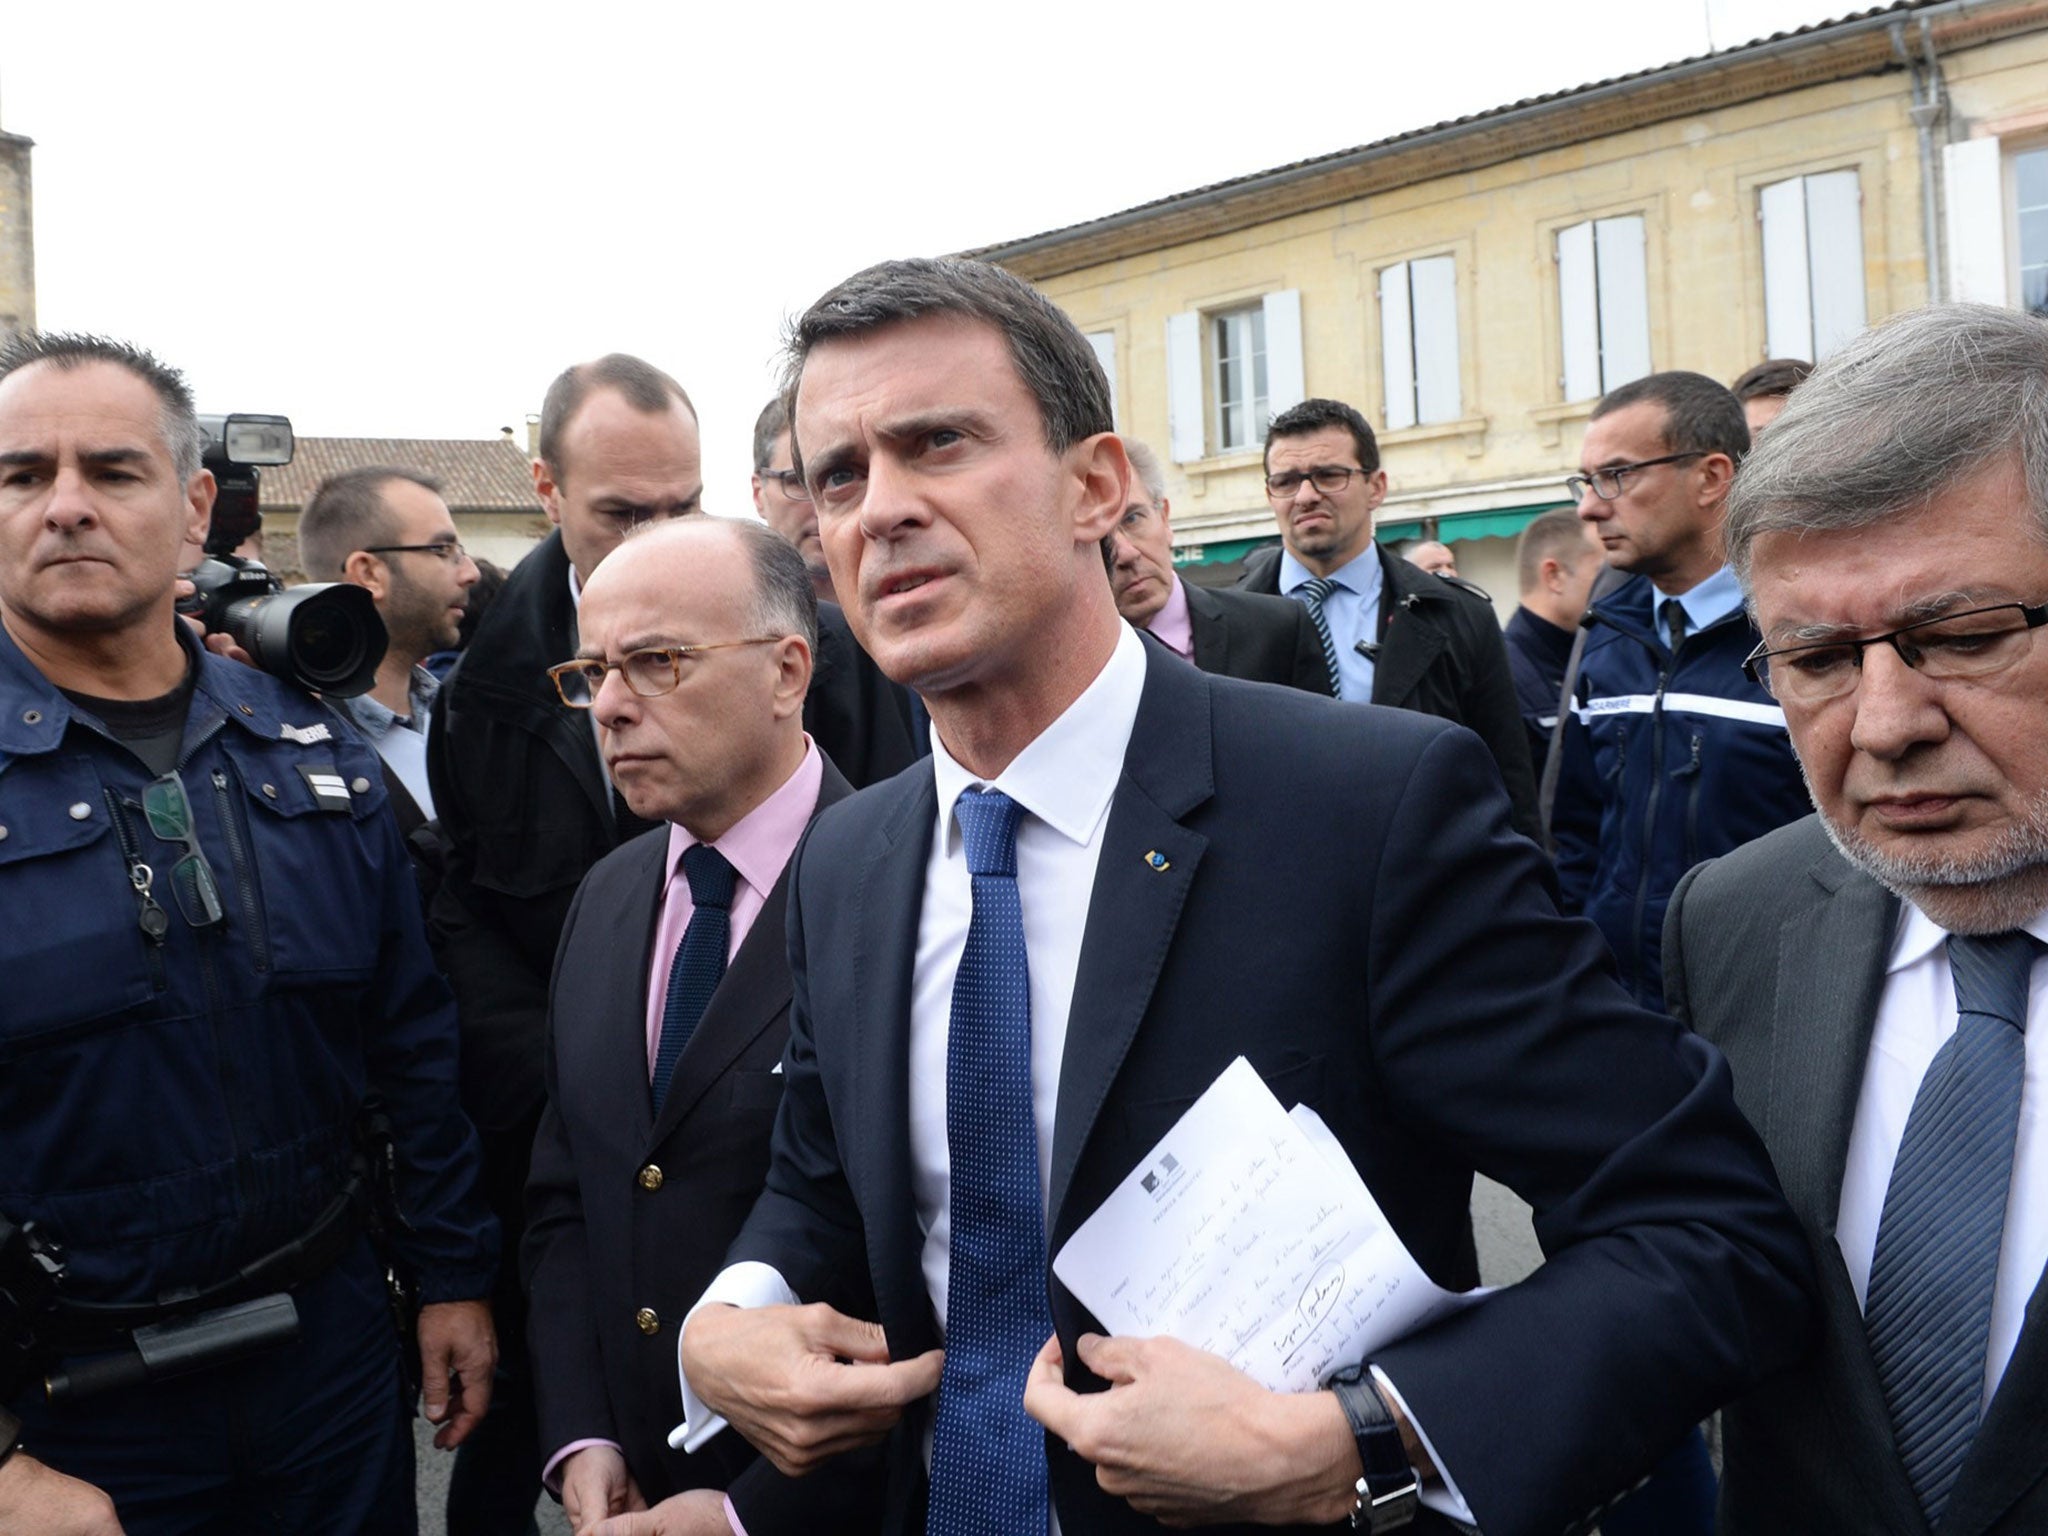 Manuel Valls and Bernard Cazeneuve at the site of the crash in Puisseguin